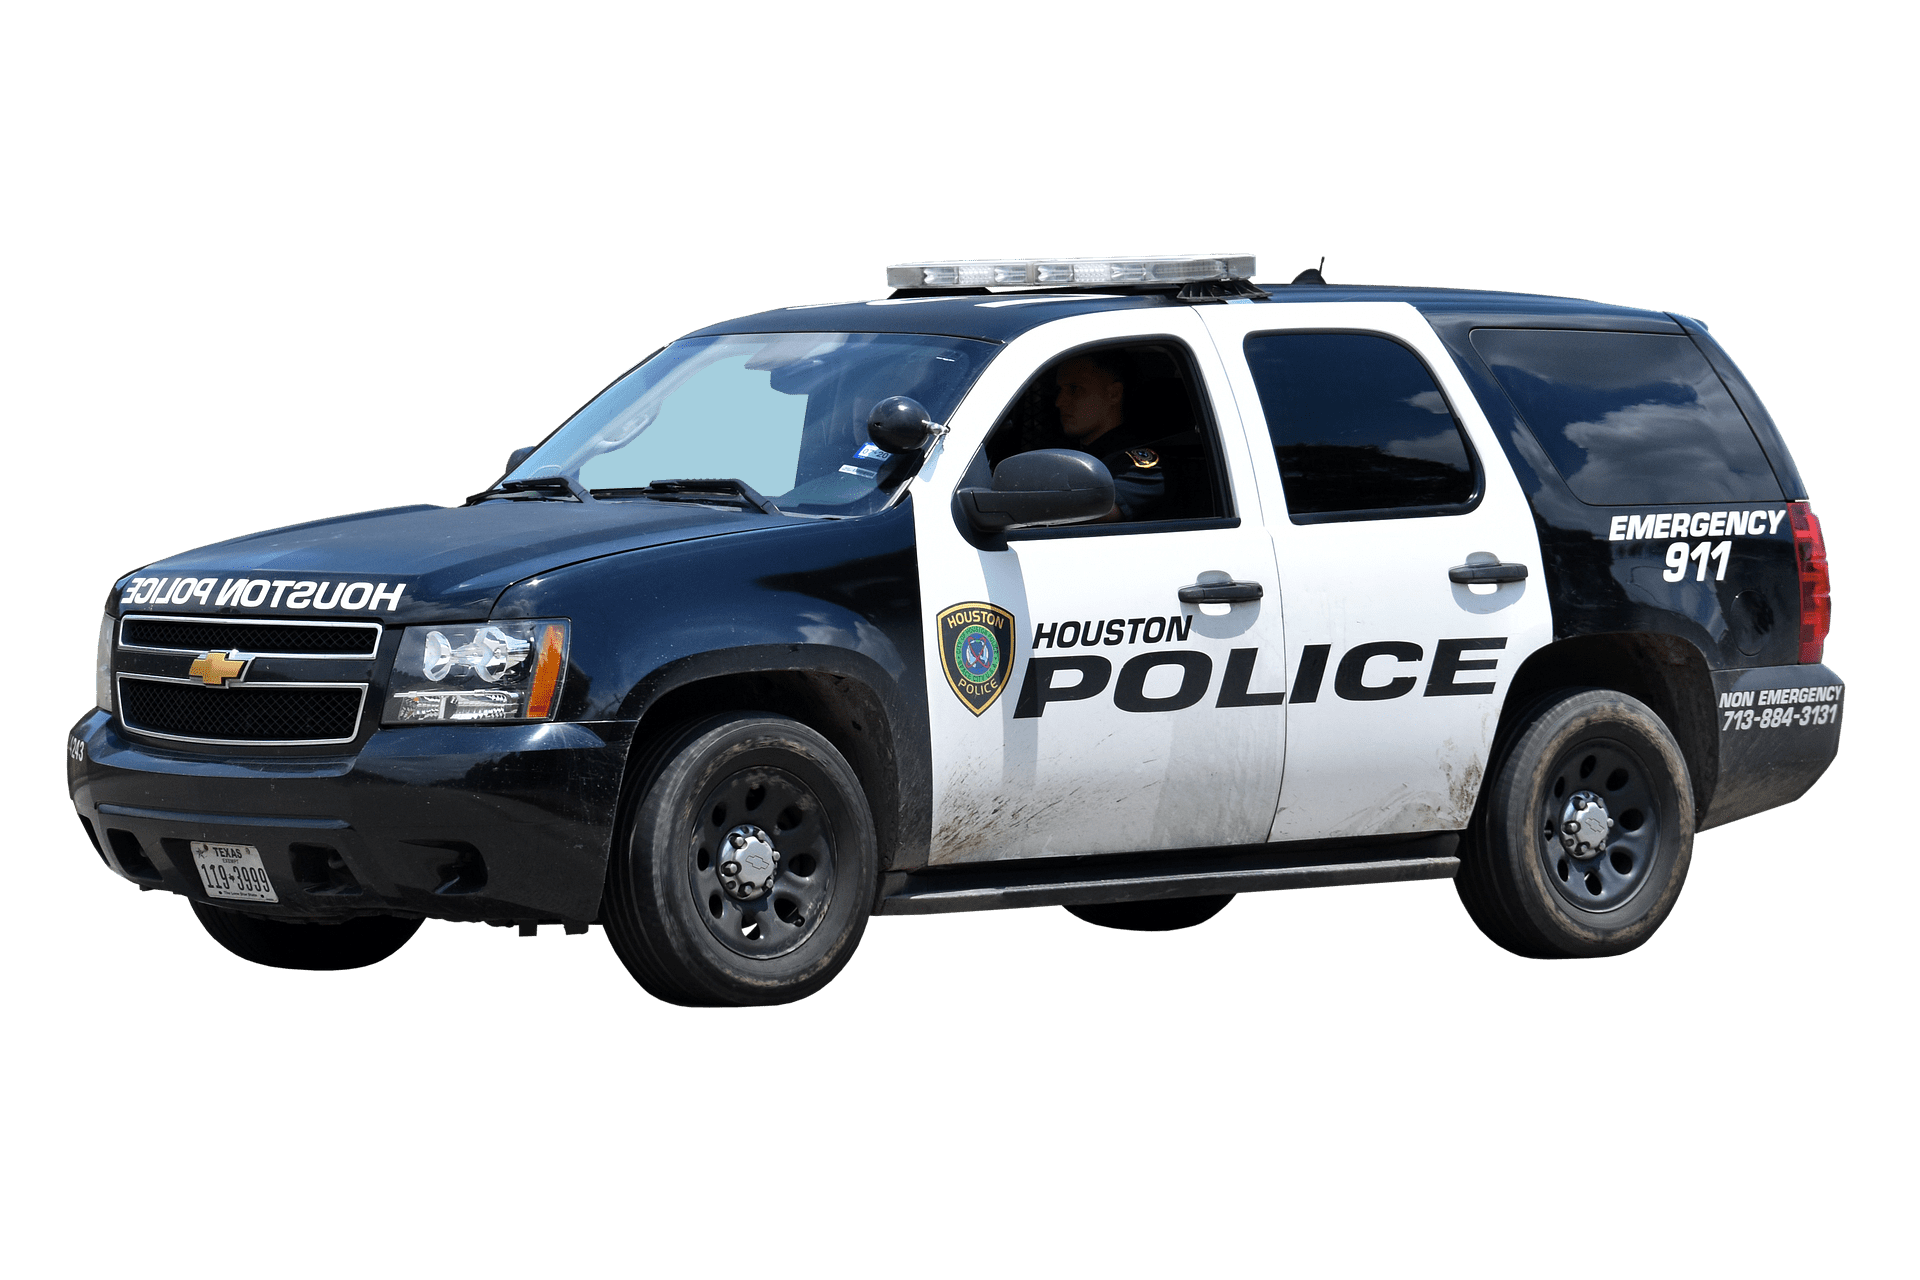 A photograph of a police vehicle | Source: Pixabay